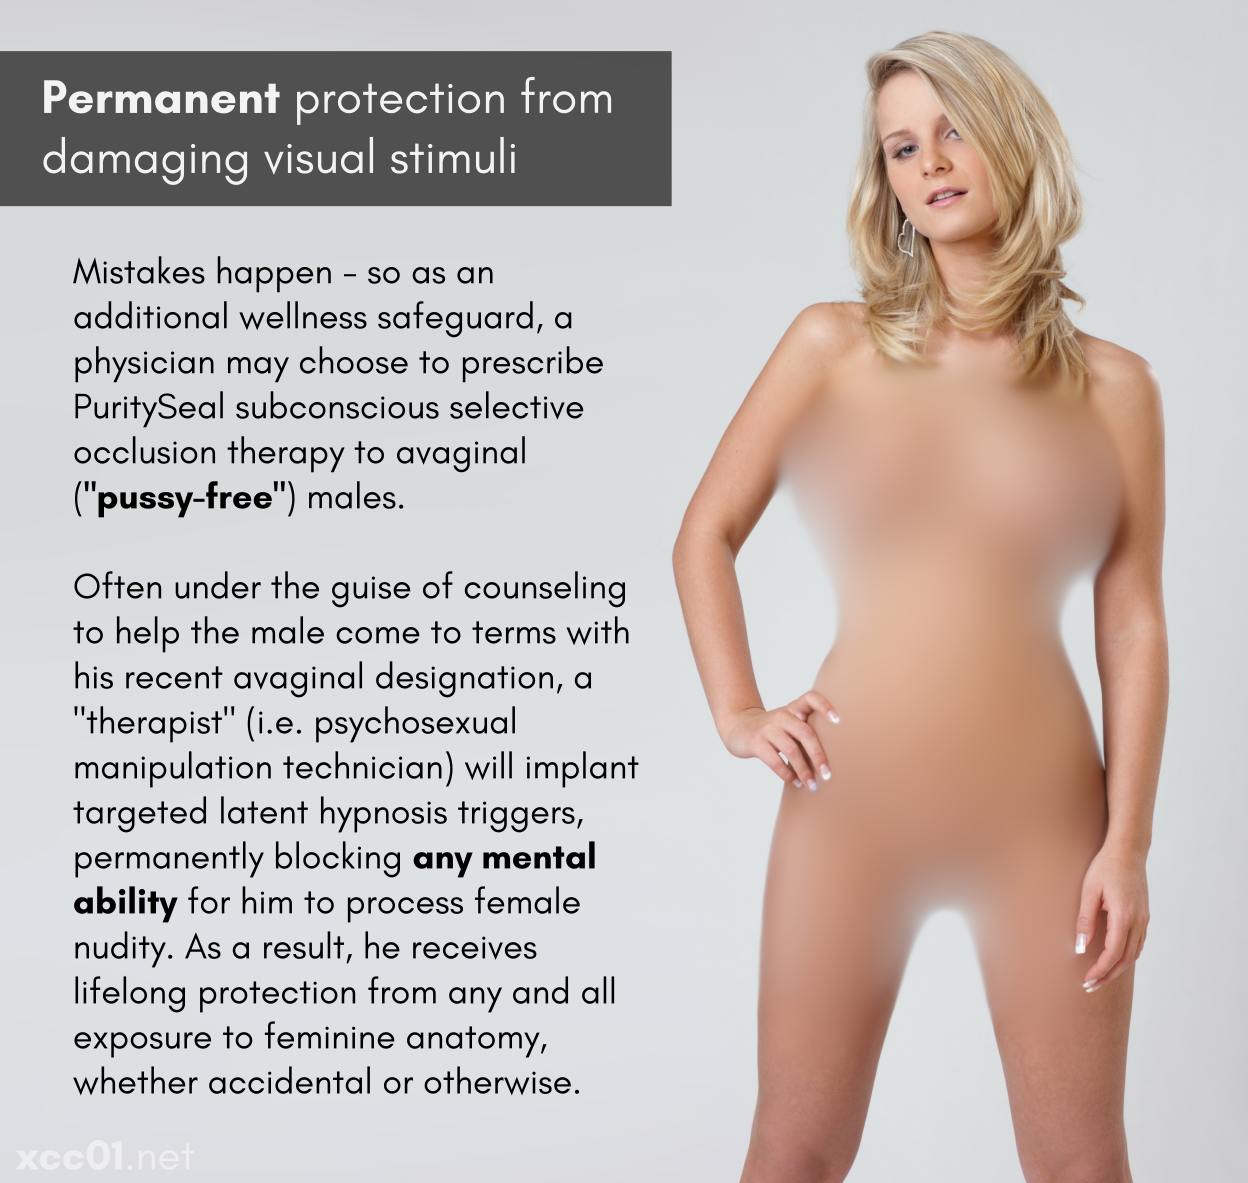 Permanent protection from damaging visual stimuli Mistakes happen - so as an additional wellness safeguard, a physician may choose to prescribe PuritySeal subconscious selective occlusion therapy to avaginal ('pussy-free') males. Often under the guise of counseling to help the male come to terms with his recent avaginal designation, a 'therapist' (i.e. psychosexual manipulation technician) will implant targeted latent hypnosis triggers, permanently blocking any mental ability for him to process female nudity. As a result, he receives lifelong protection from any and all exposure to feminine anatomy, whether accidental or otherwise.
